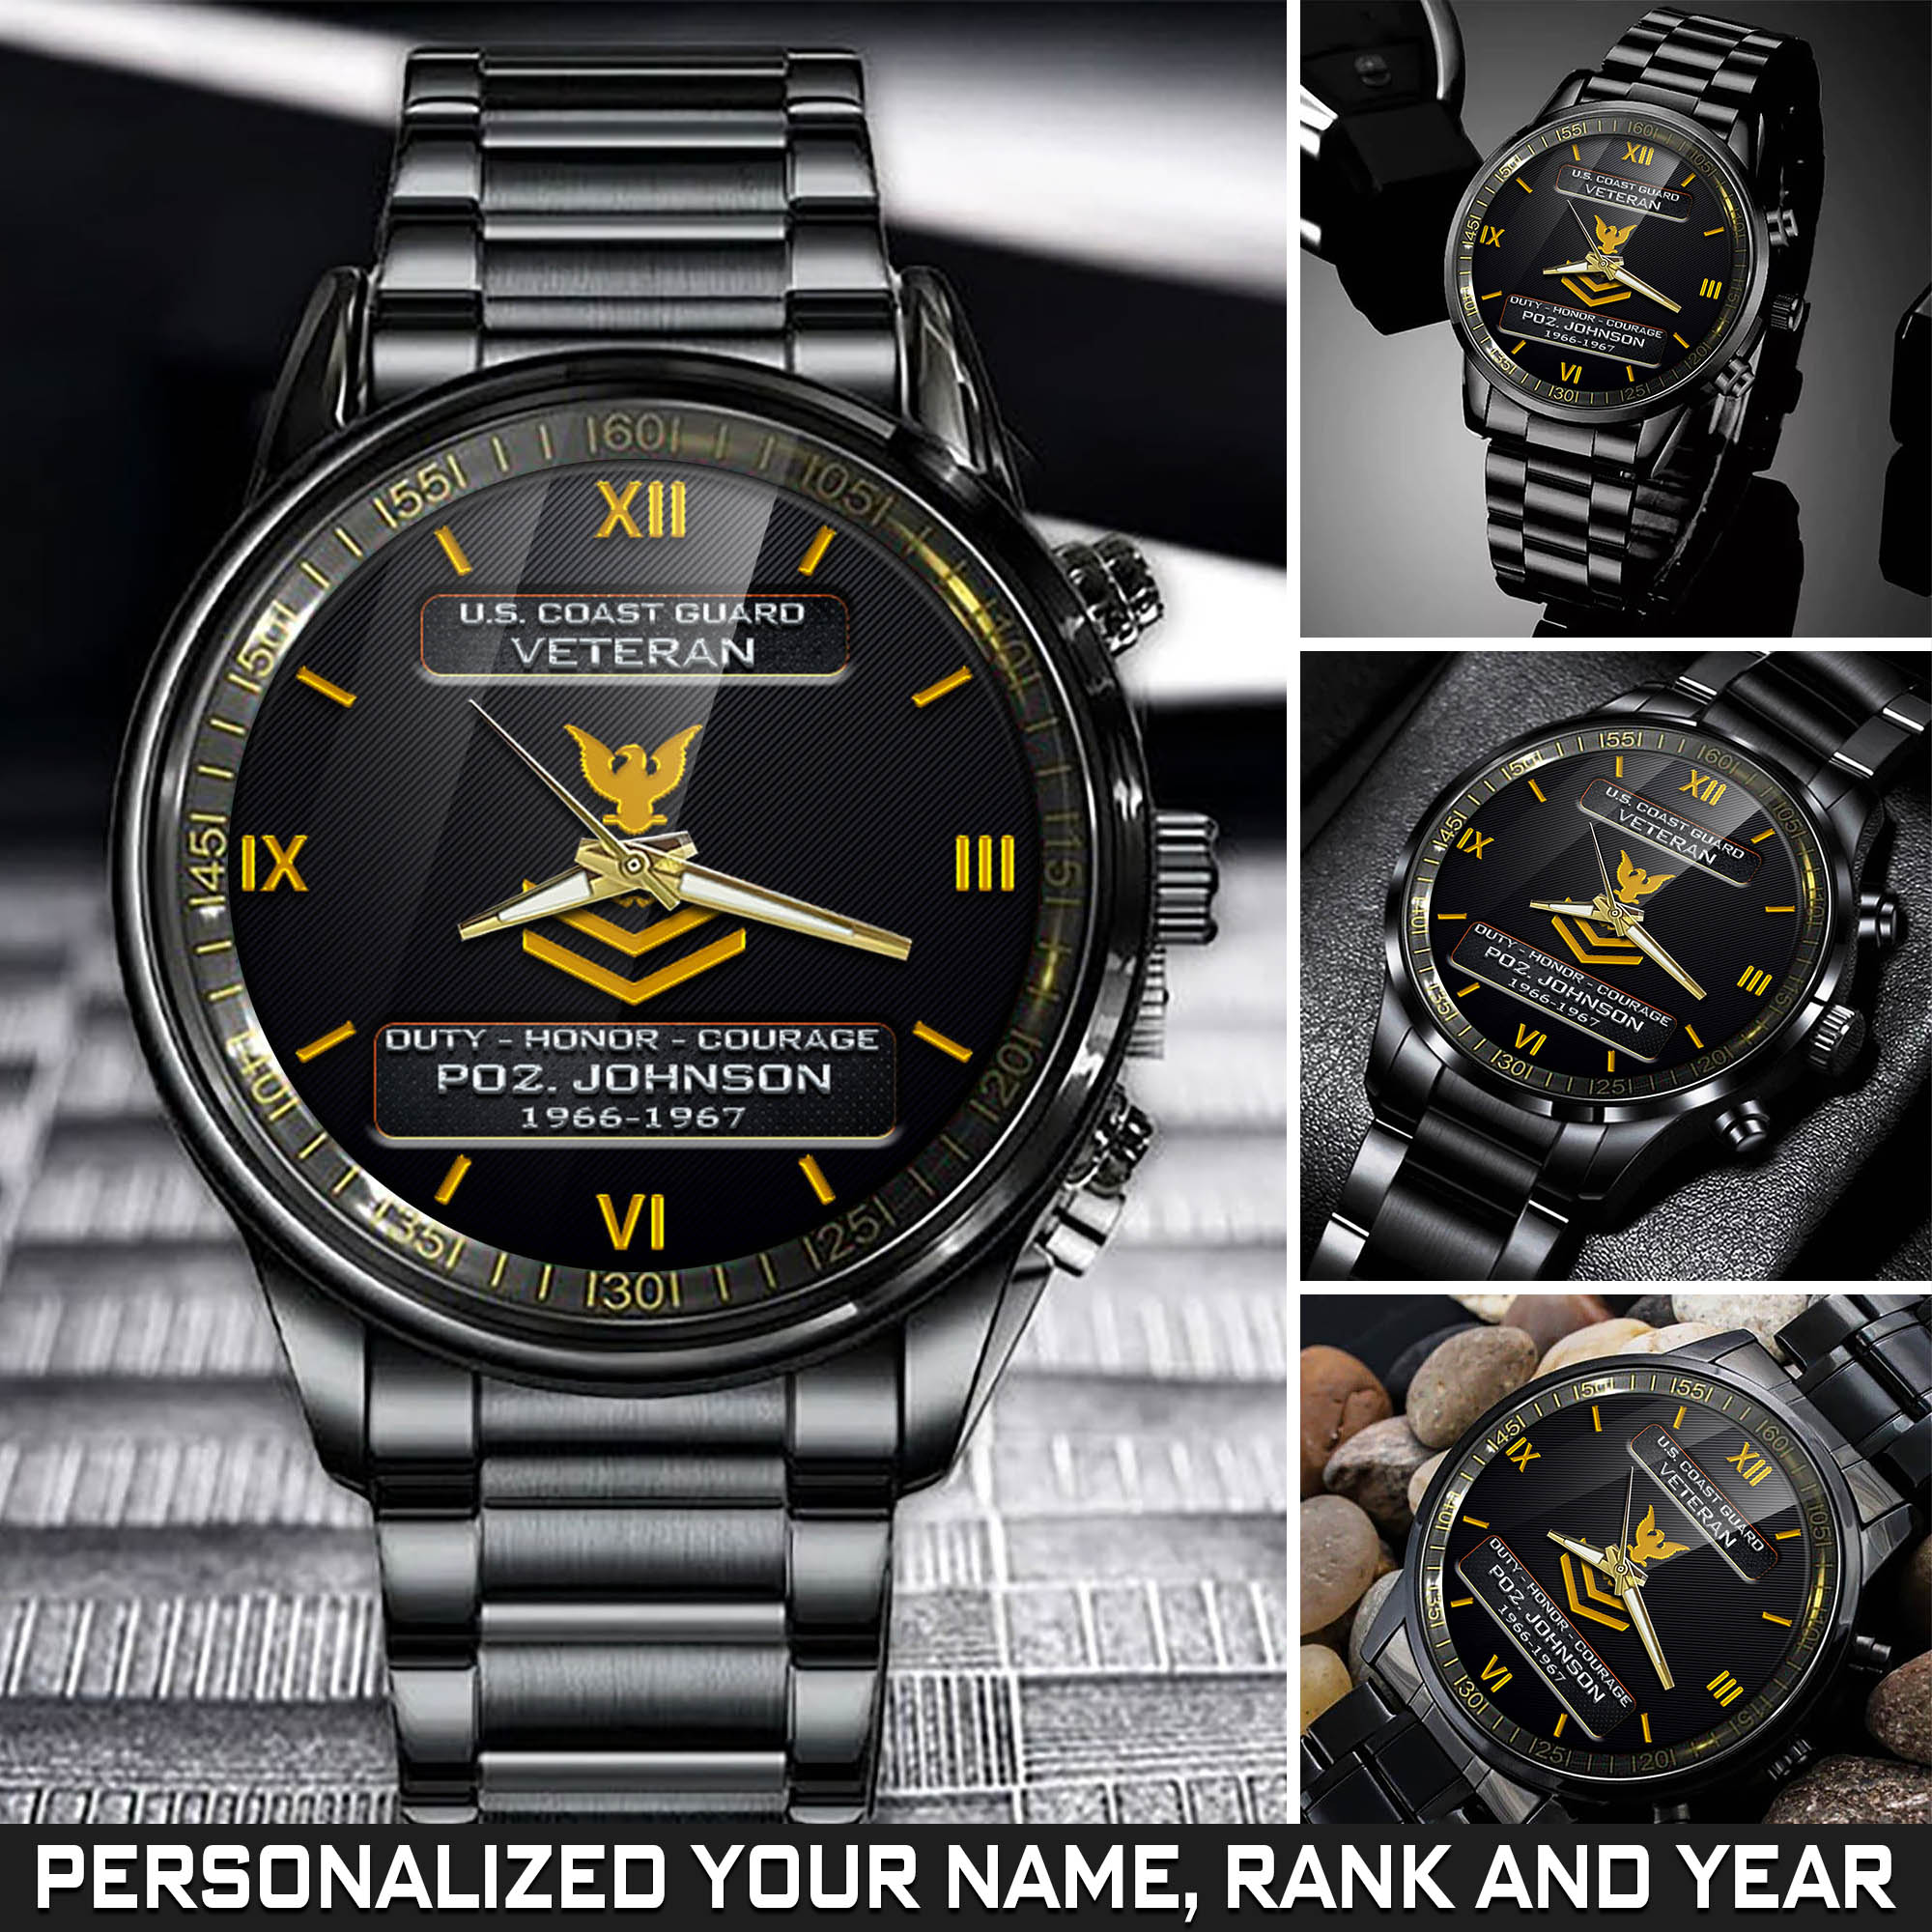 Personalized U.S. Coast Guard Veteran Black Fashion Watch With Your Name, Year And Rank, Military Watch For Veterans, Gift For Veterans ETHY-57684